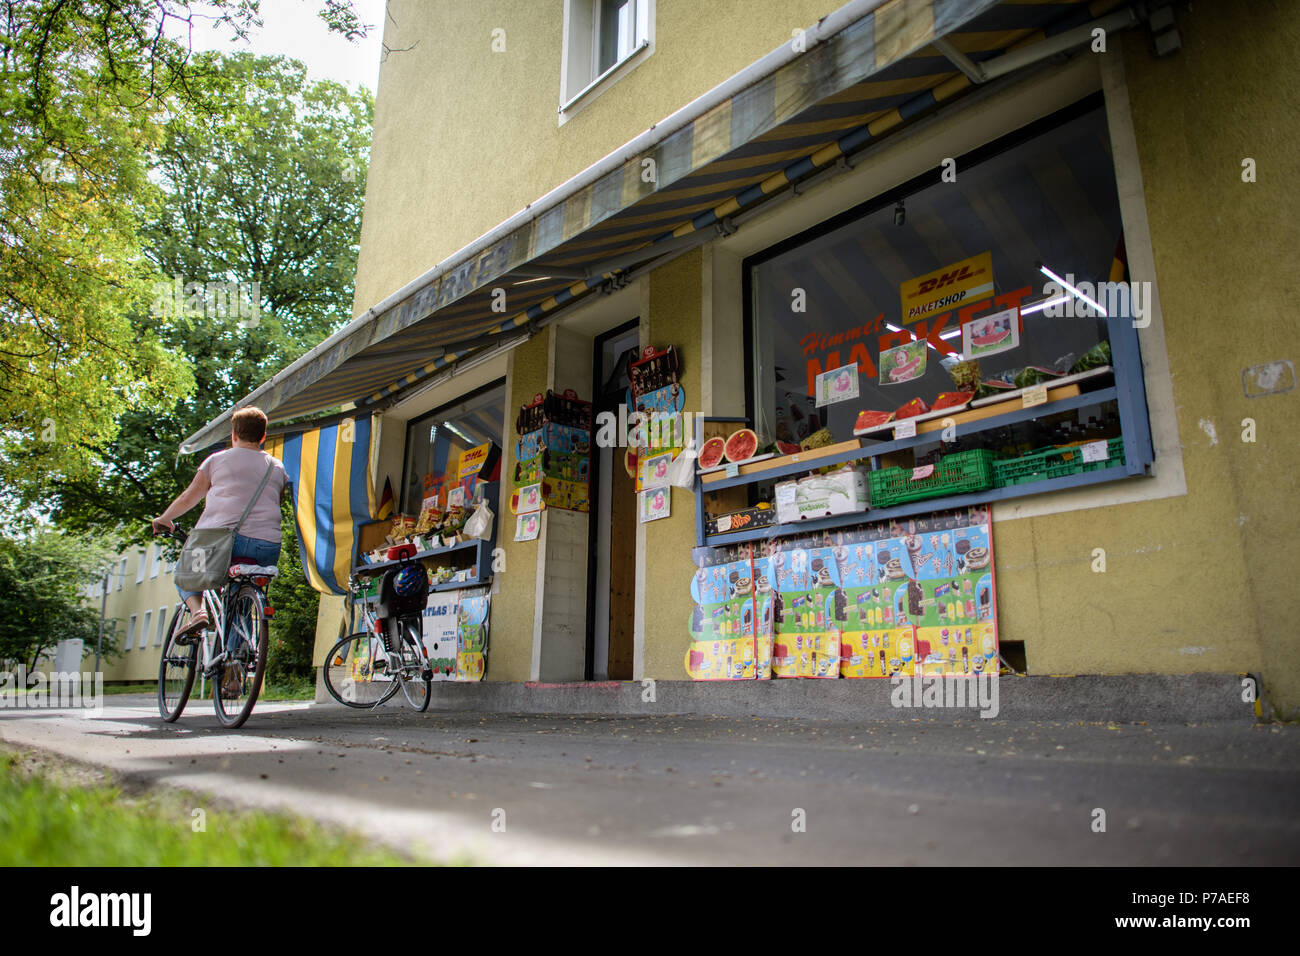 Germany, Munich. 5th July, 2018. the 'Himmet Market' at the Bad Schachener Street in the district of Ramersdorf. The rooms formerly housed the fish shop of Habil Kilic, 38 years old. He was murdered by the National Socialist Underground on the 29th of August 2001. The murder is commemorated by a memorial sign made of stone next to the shop. Credit: Matthias Balk/dpa/Alamy Live News Stock Photo